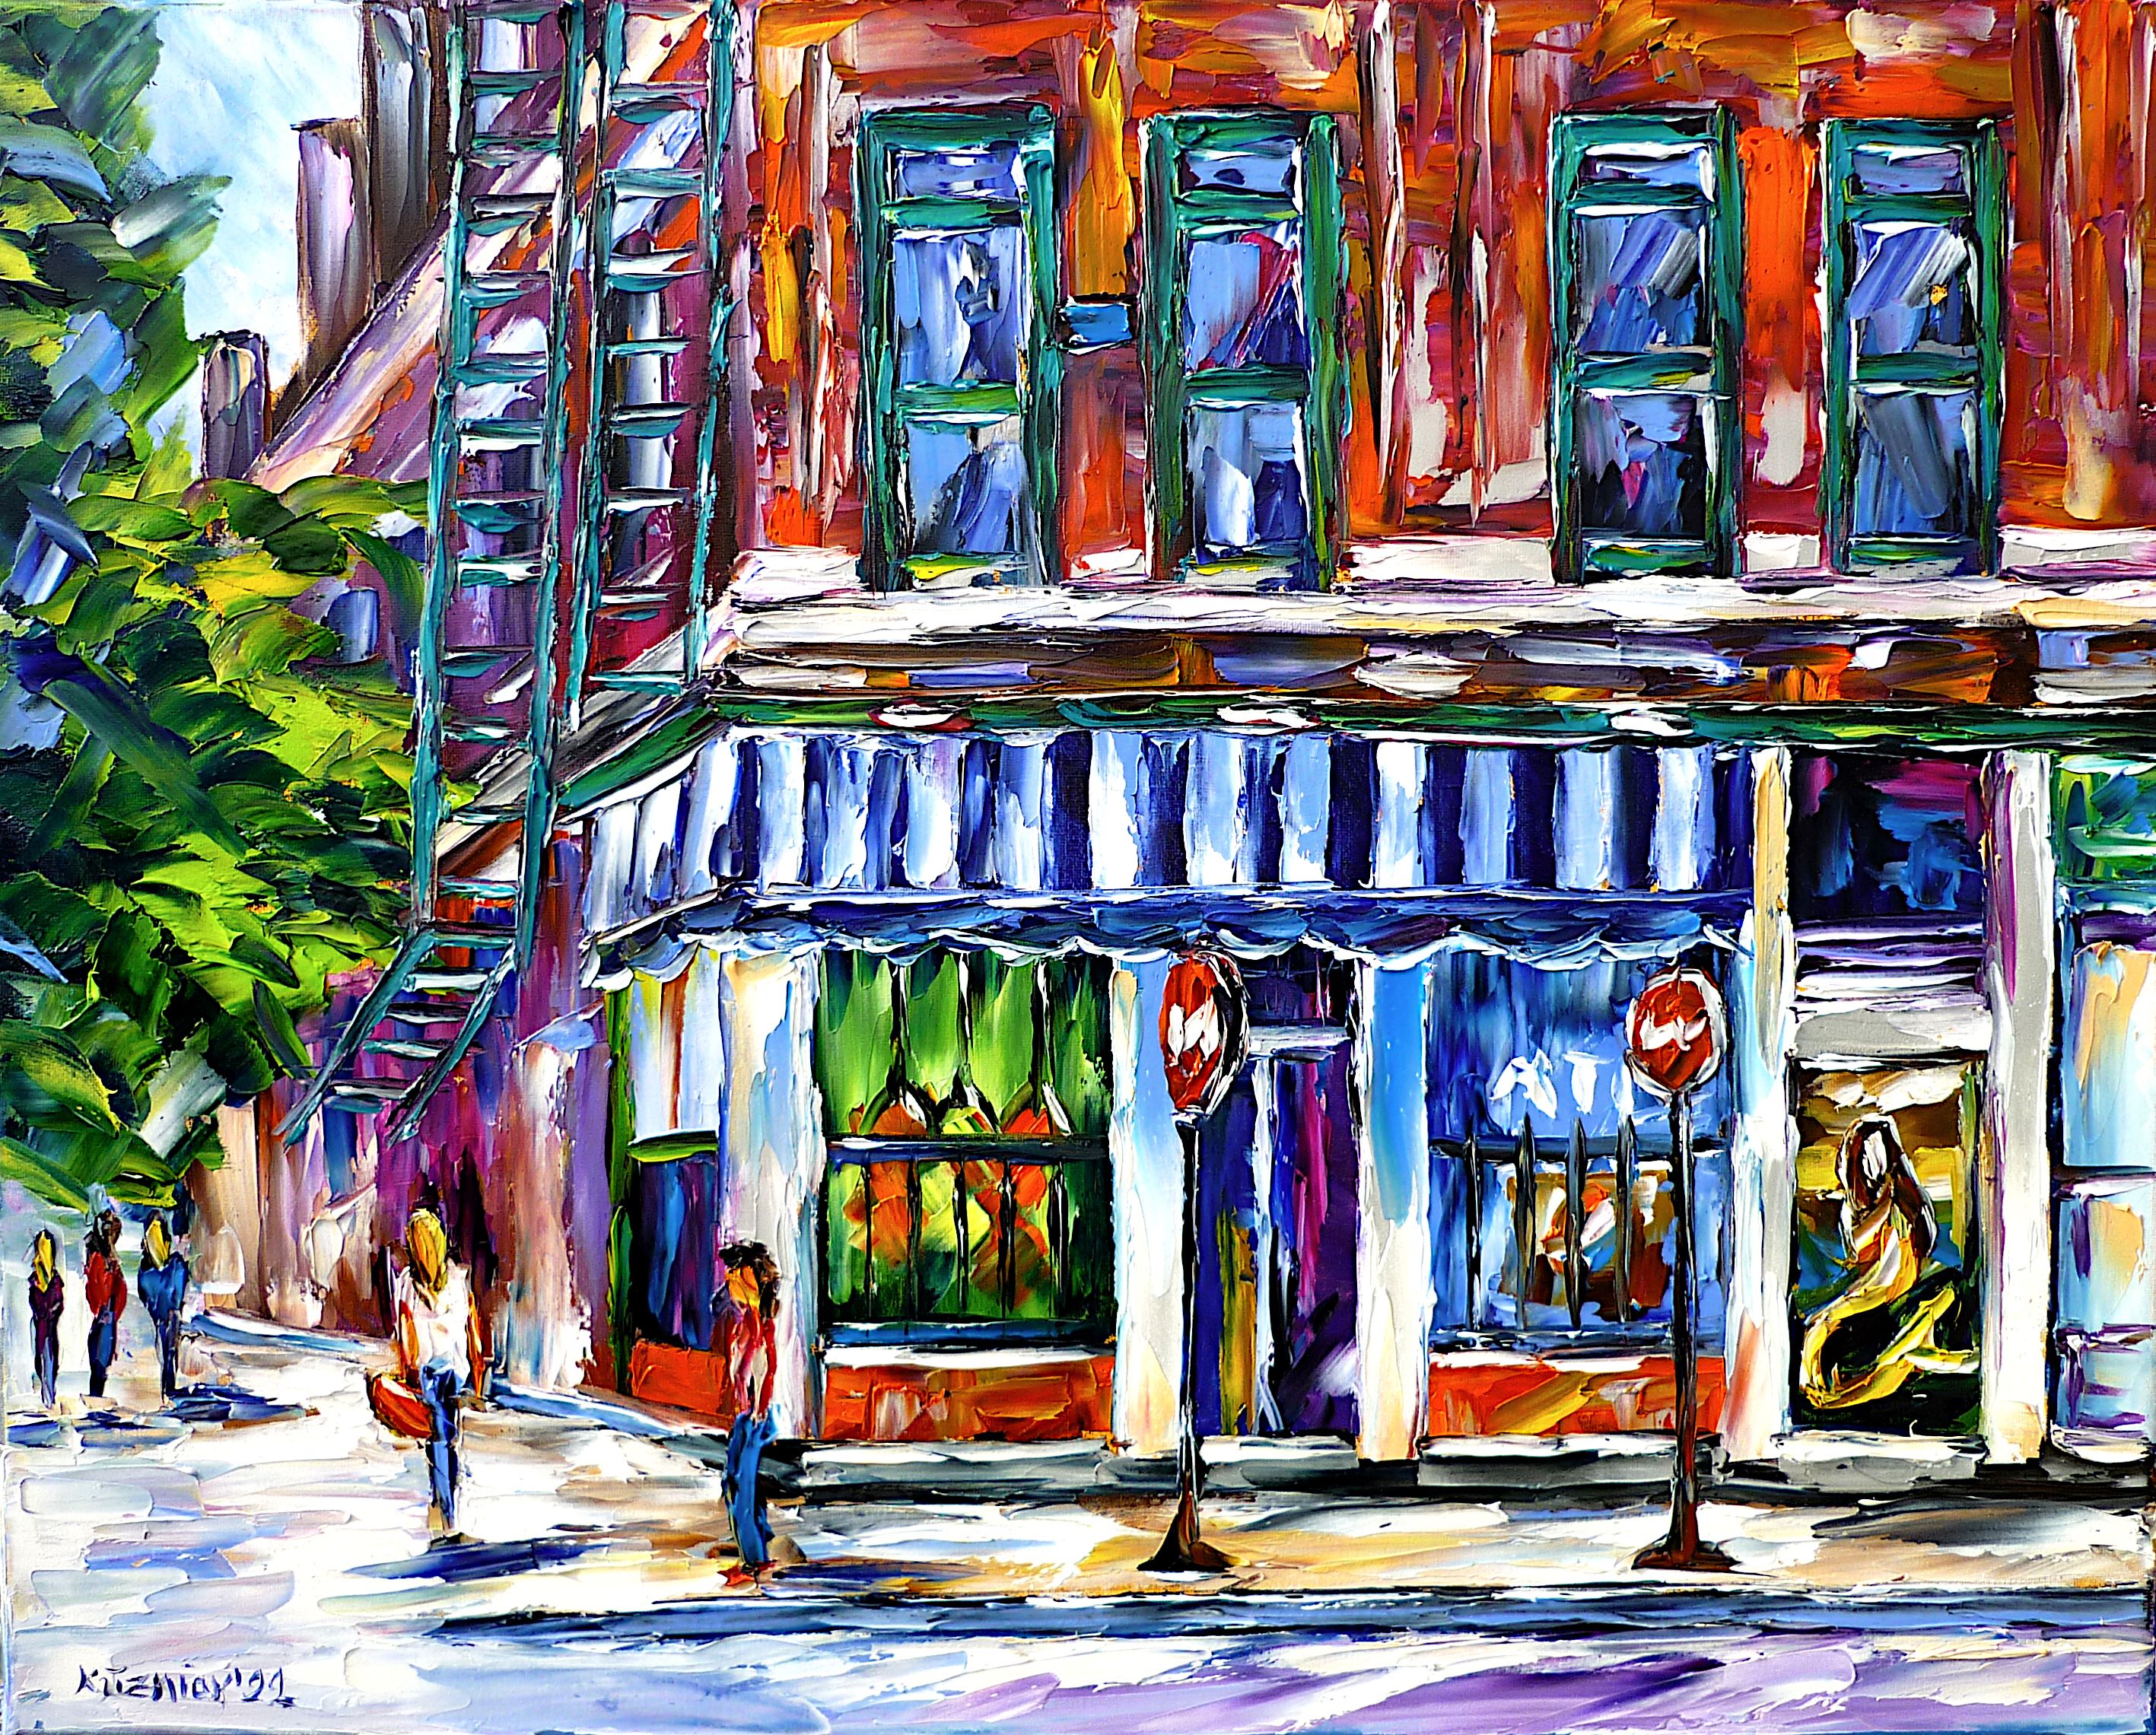 chicago city scene,streets of chicago,chicago cityscape,chicago streetscape,yaya's mini mart,building fire escape,city pedestrian,city people,chicago people,chicago oil painting,chicago supermarket,shopping,city walk,city stroll,strolling people,people on street,beautiful chicago,old chicago,chicago love,chicago lovers,i love chicago,chicago beauty,chicago alive,chicago life,chicago colorful,city life,chicago abstract,palette knife oil painting,modern art,impressionism,abstract painting,lively colors,colorful painting,bright colors,light reflections,impasto painting,figurative